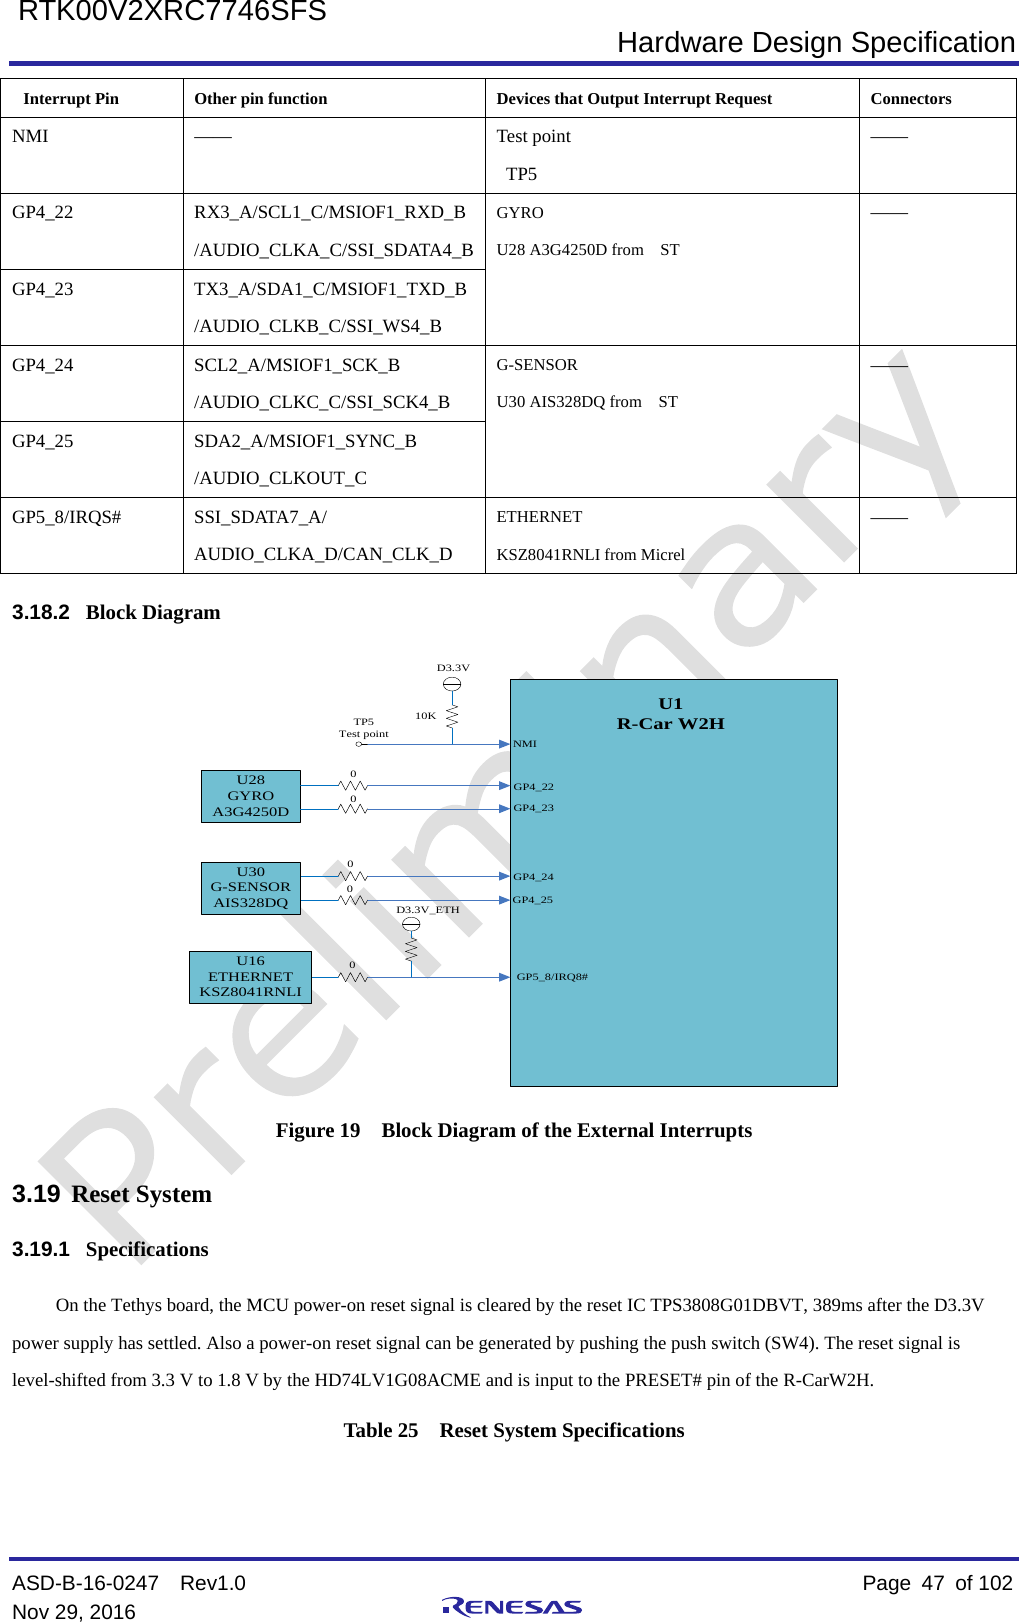  Hardware Design Specification ASD-B-16-0247  Rev1.0    Page  47 of 102 Nov 29, 2016     RTK00V2XRC7746SFS Interrupt Pin  Other pin function Devices that Output Interrupt Request Connectors NMI  ——  Test point  TP5 —— GP4_22  RX3_A/SCL1_C/MSIOF1_RXD_B /AUDIO_CLKA_C/SSI_SDATA4_B GYRO U28 A3G4250D from    ST —— GP4_23  TX3_A/SDA1_C/MSIOF1_TXD_B /AUDIO_CLKB_C/SSI_WS4_B GP4_24  SCL2_A/MSIOF1_SCK_B /AUDIO_CLKC_C/SSI_SCK4_B G-SENSOR U30 AIS328DQ from    ST —— GP4_25  SDA2_A/MSIOF1_SYNC_B /AUDIO_CLKOUT_C GP5_8/IRQS#  SSI_SDATA7_A/ AUDIO_CLKA_D/CAN_CLK_D ETHERNET KSZ8041RNLI from Micrel —— 3.18.2 Block Diagram U1R-Car W2HNMID3.3VTP5Test pointGP4_22GP4_23U28GYROA3G4250D00GP4_24GP4_2500U30G-SENSORAIS328DQGP5_8/IRQ8#0U16ETHERNETKSZ8041RNLI10KD3.3V_ETH Figure 19  Block Diagram of the External Interrupts 3.19 Reset System 3.19.1 Specifications On the Tethys board, the MCU power-on reset signal is cleared by the reset IC TPS3808G01DBVT, 389ms after the D3.3V power supply has settled. Also a power-on reset signal can be generated by pushing the push switch (SW4). The reset signal is level-shifted from 3.3 V to 1.8 V by the HD74LV1G08ACME and is input to the PRESET# pin of the R-CarW2H. Table 25  Reset System Specifications 